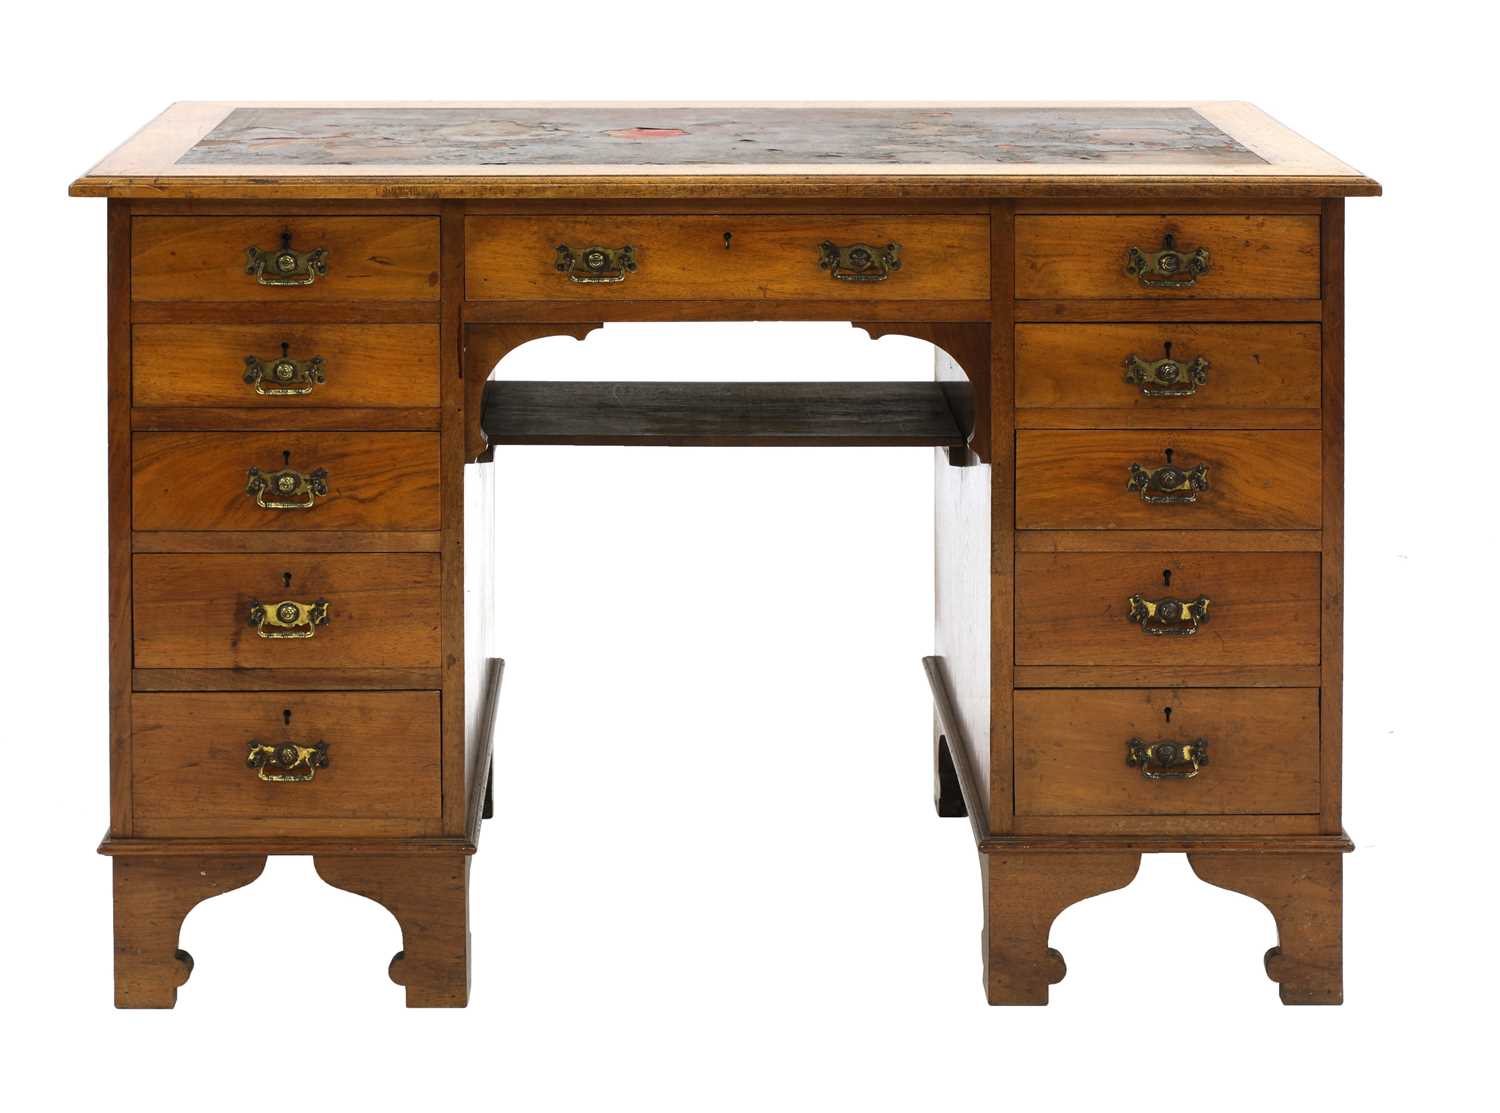 An Arts and Crafts walnut desk, - Image 3 of 4